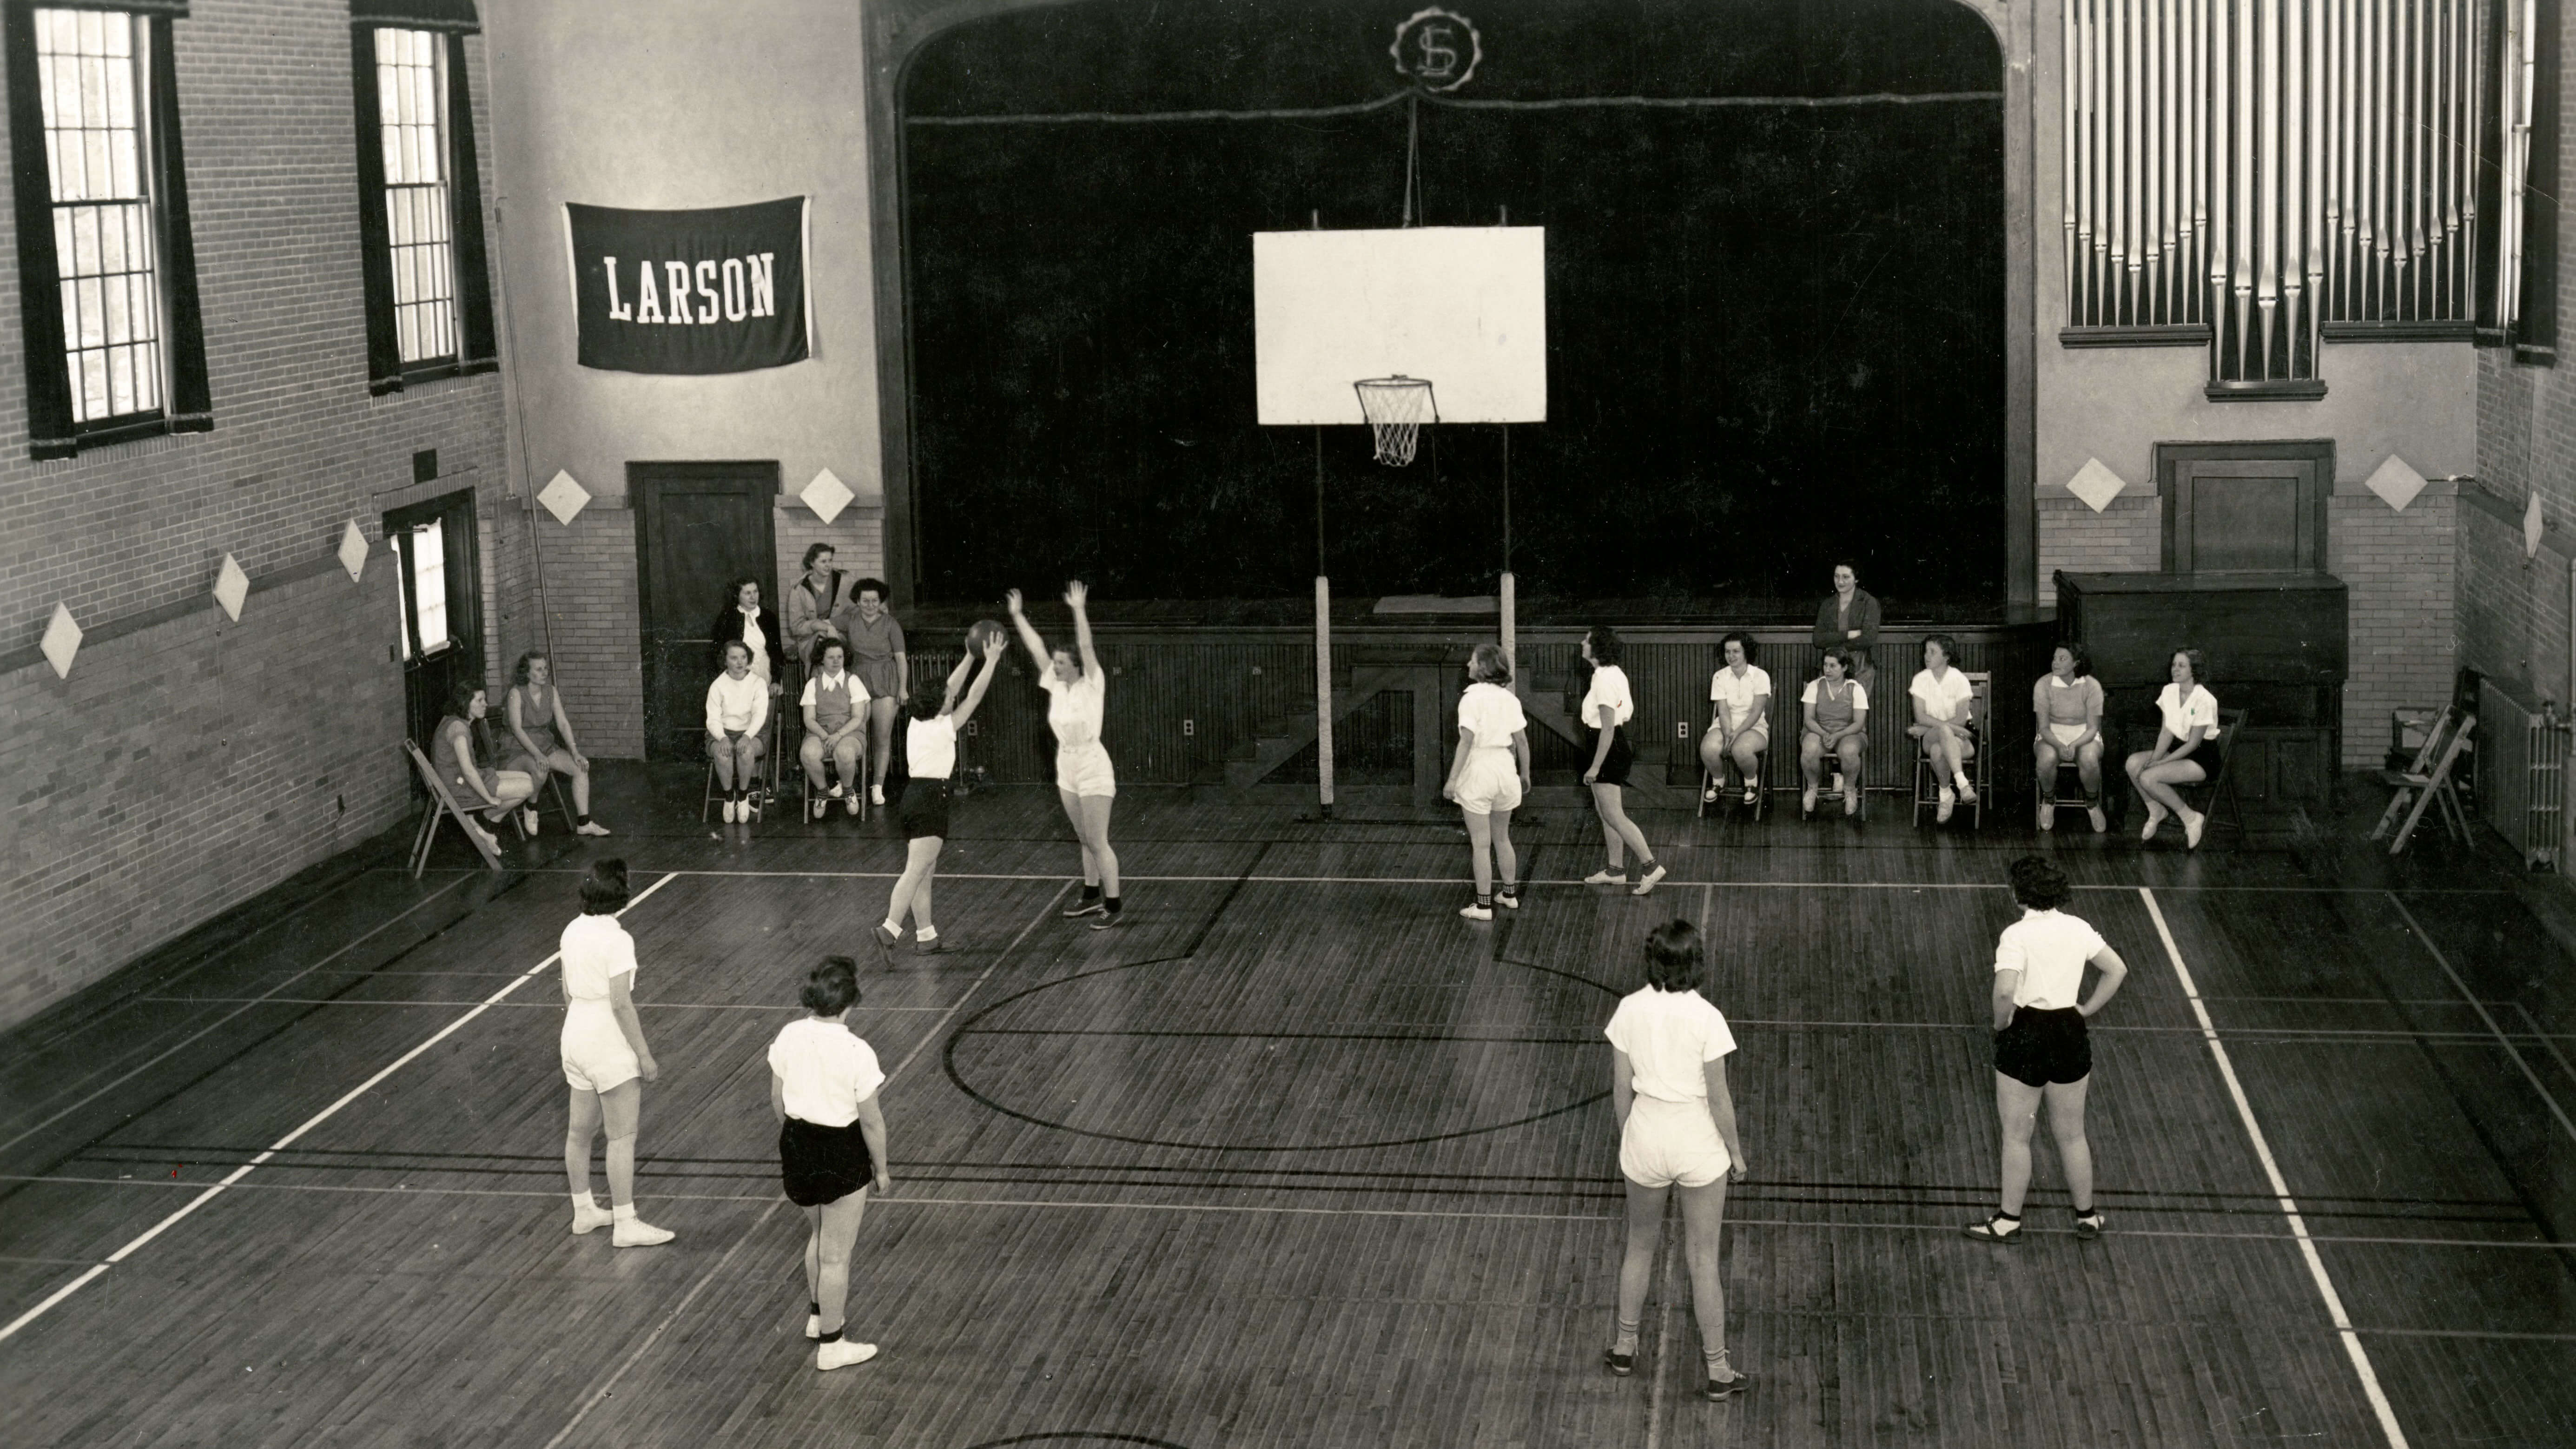 Ladies playing basketball on an indoor court